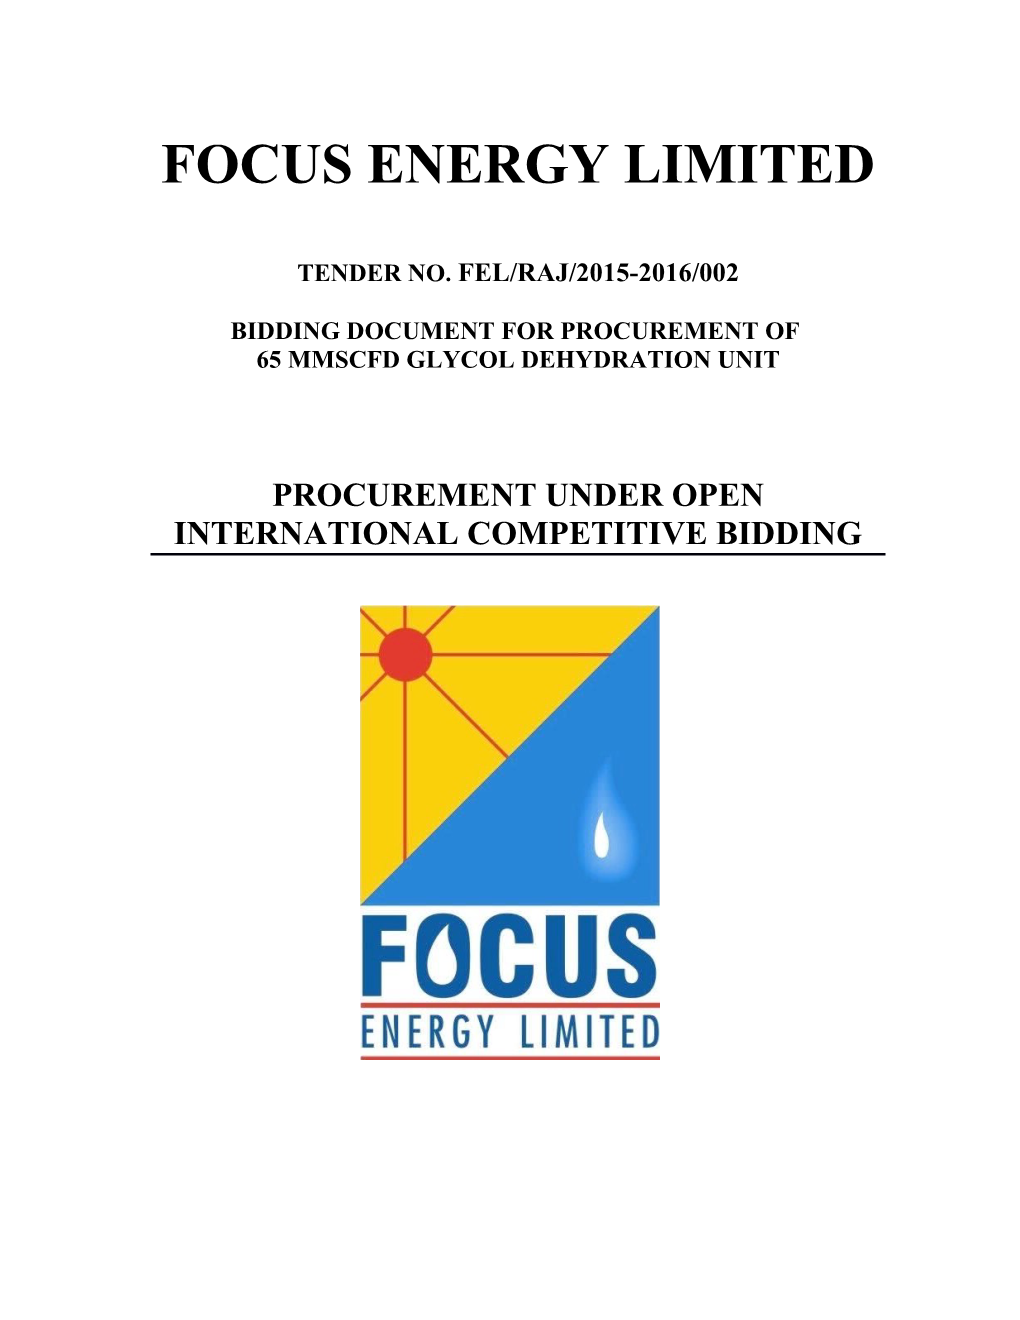 Focus Energy Limited